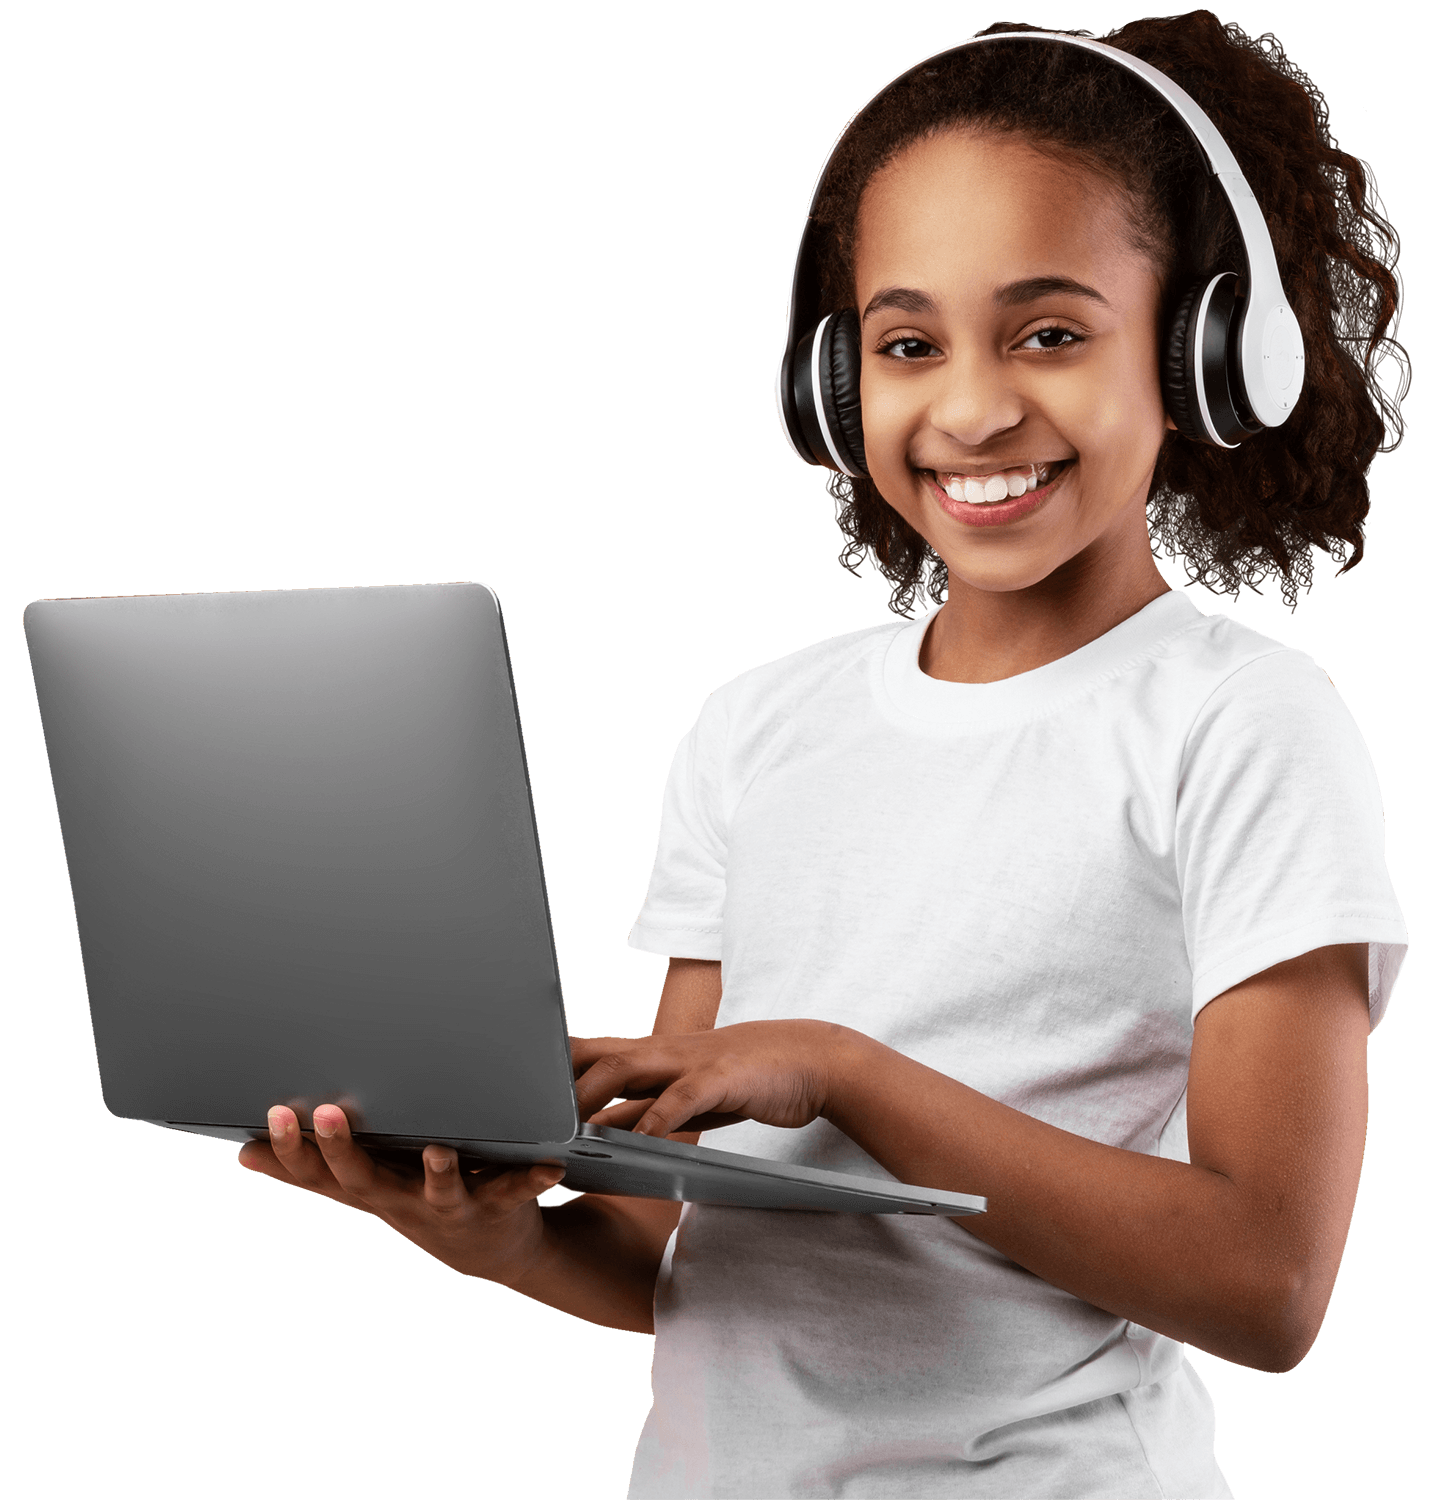 A girl wearing headphones and using a laptop